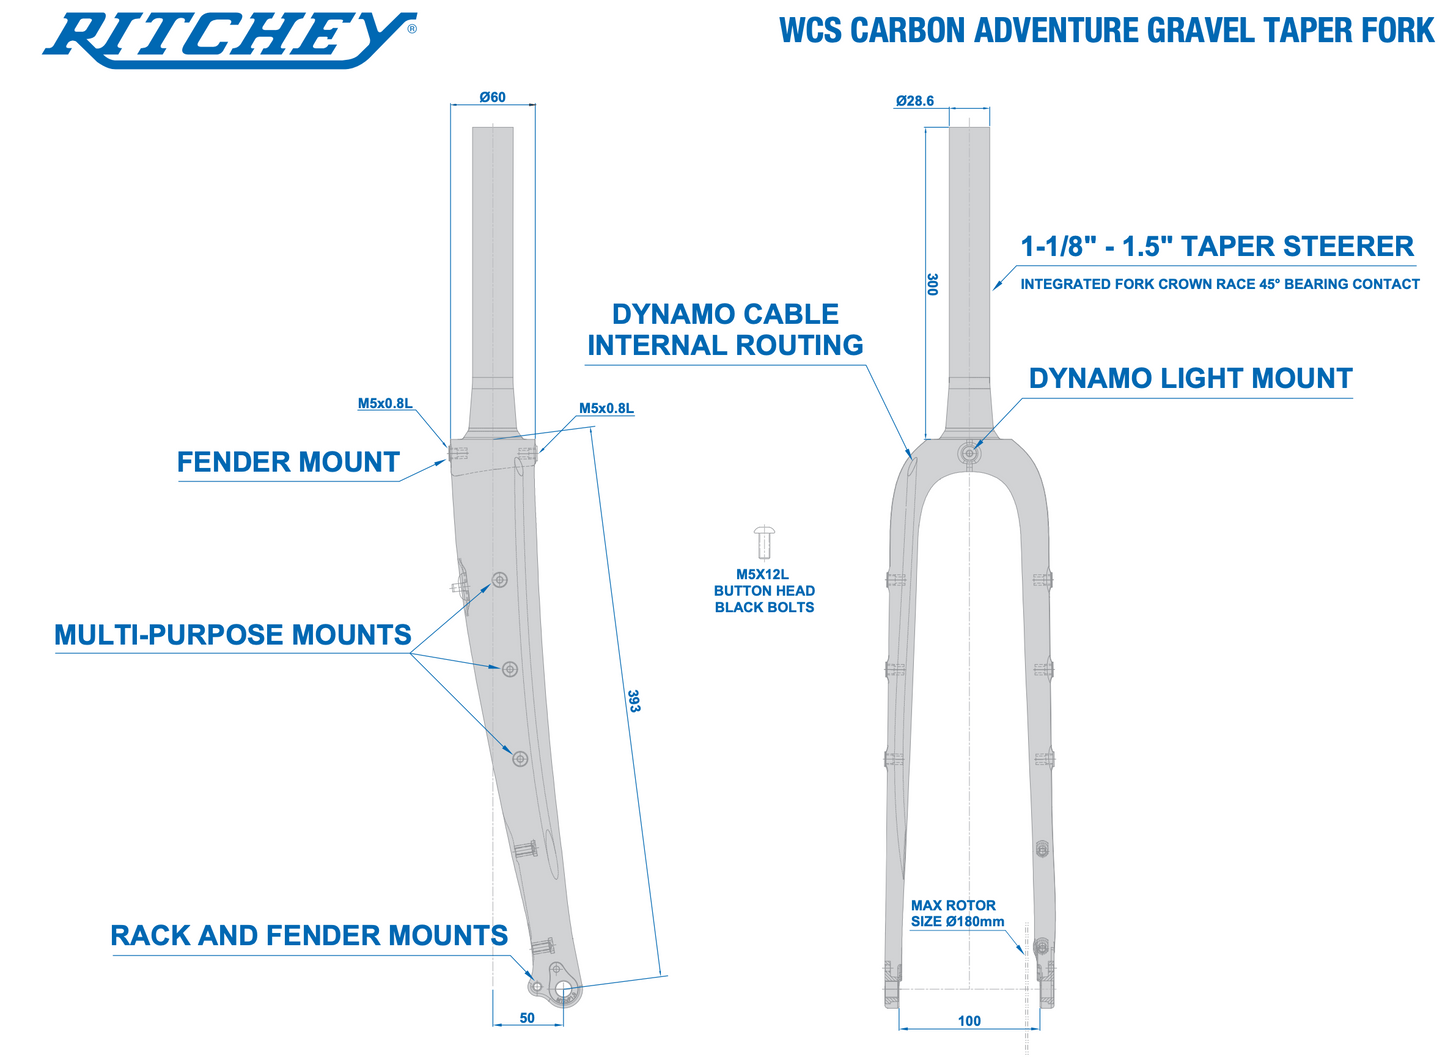 Fourche Carbone Ritchey WCS Gravel Adventure Tapered 1/5"